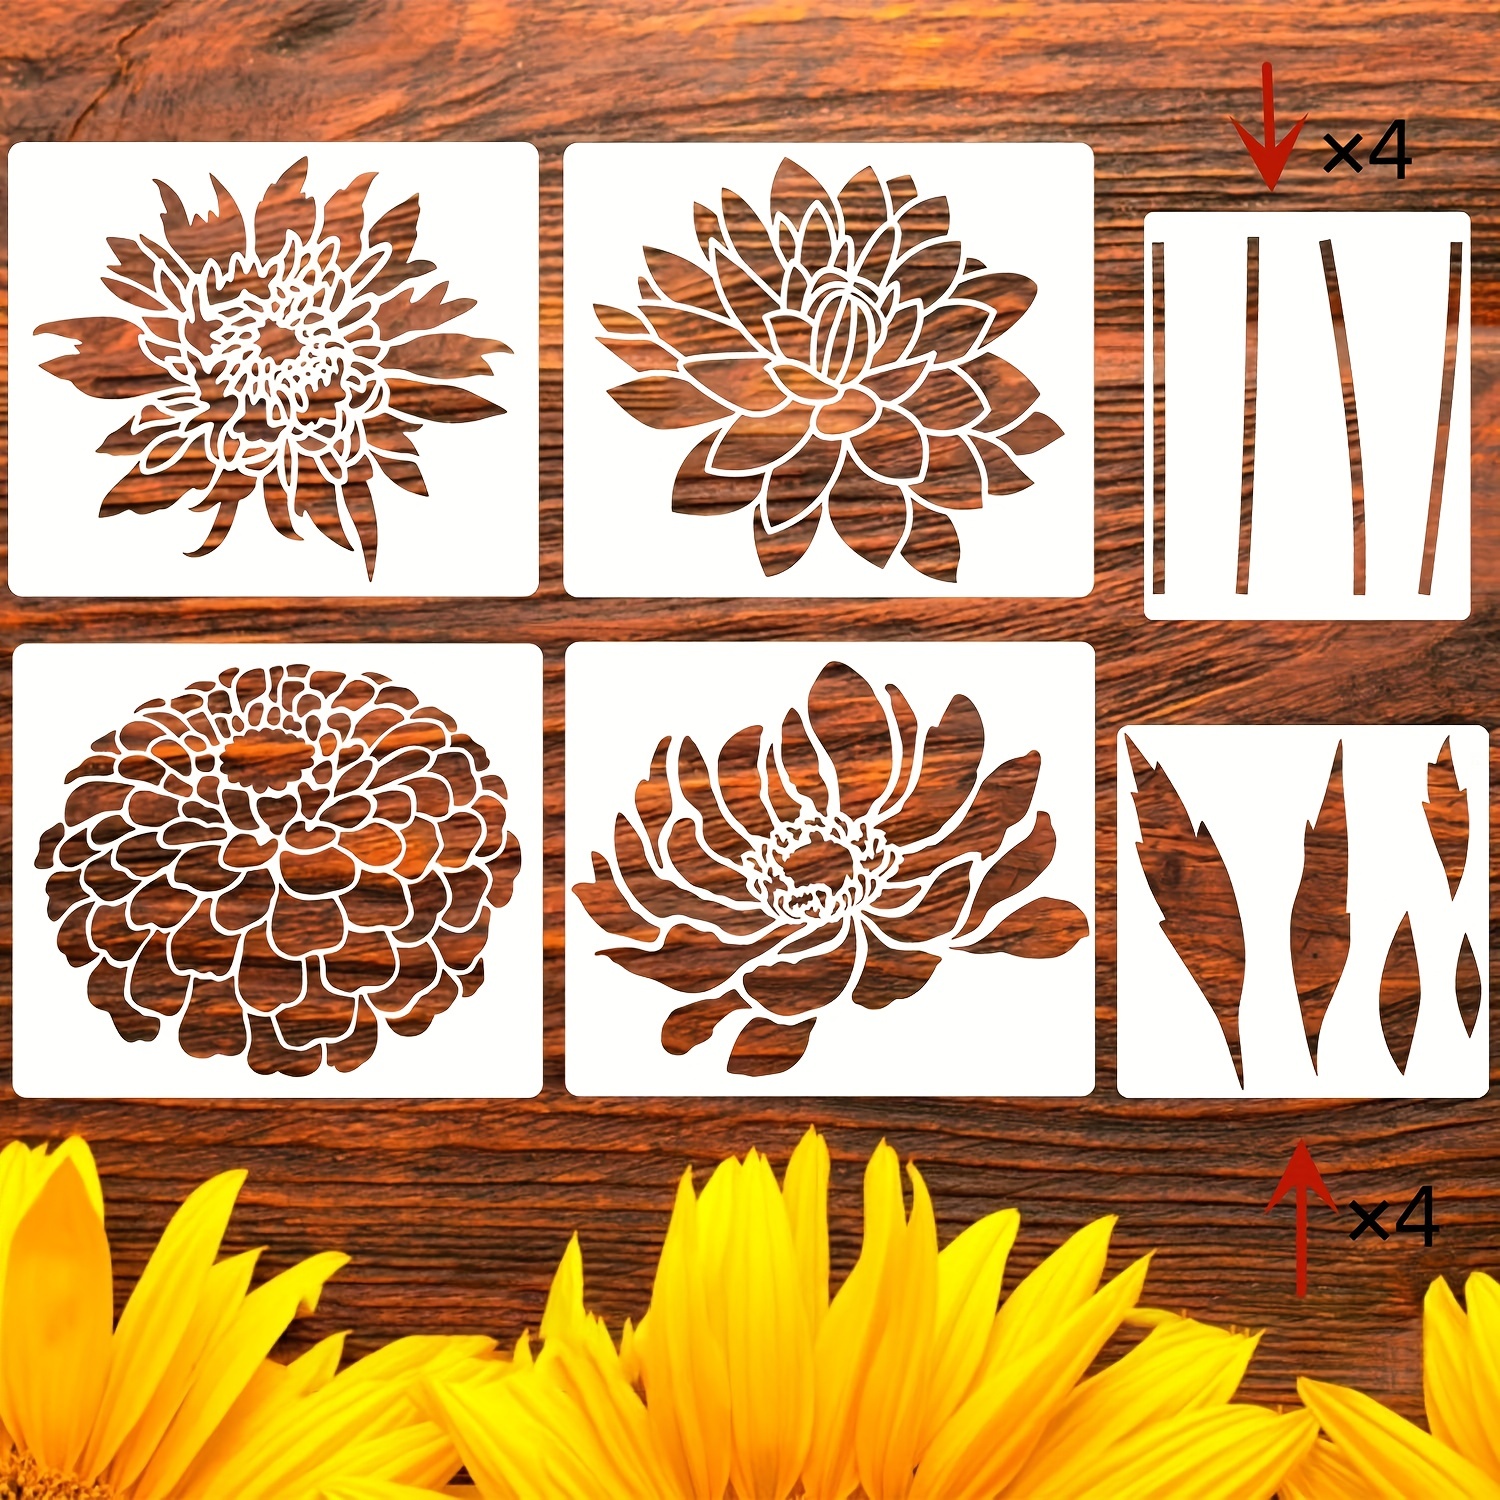 Large Flower Stencils for Painting Floral Leaf Stencil Rose Vine Background  Template Paint Stencils for Painting on Wood Burning Art Craft Canvas